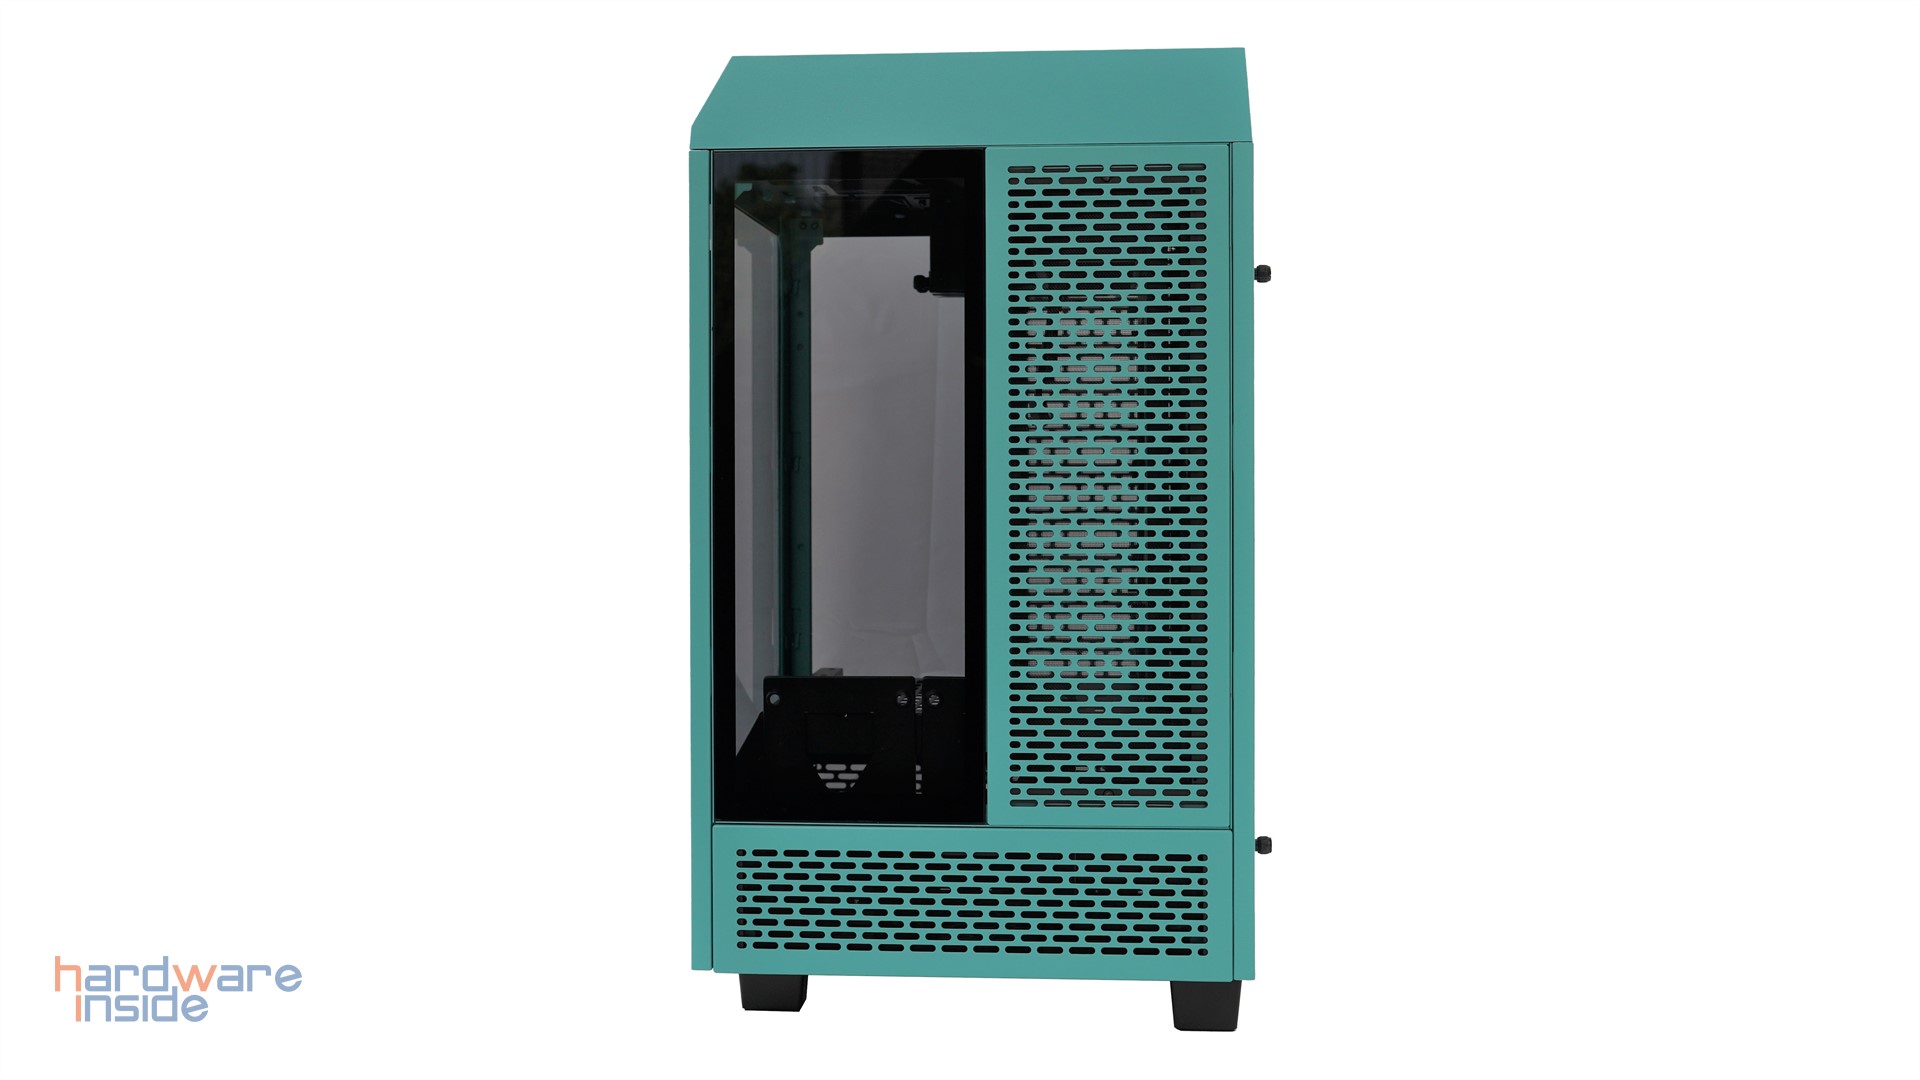 thermaltake-the-tower-100-turquoise-mini-rechts.JPG